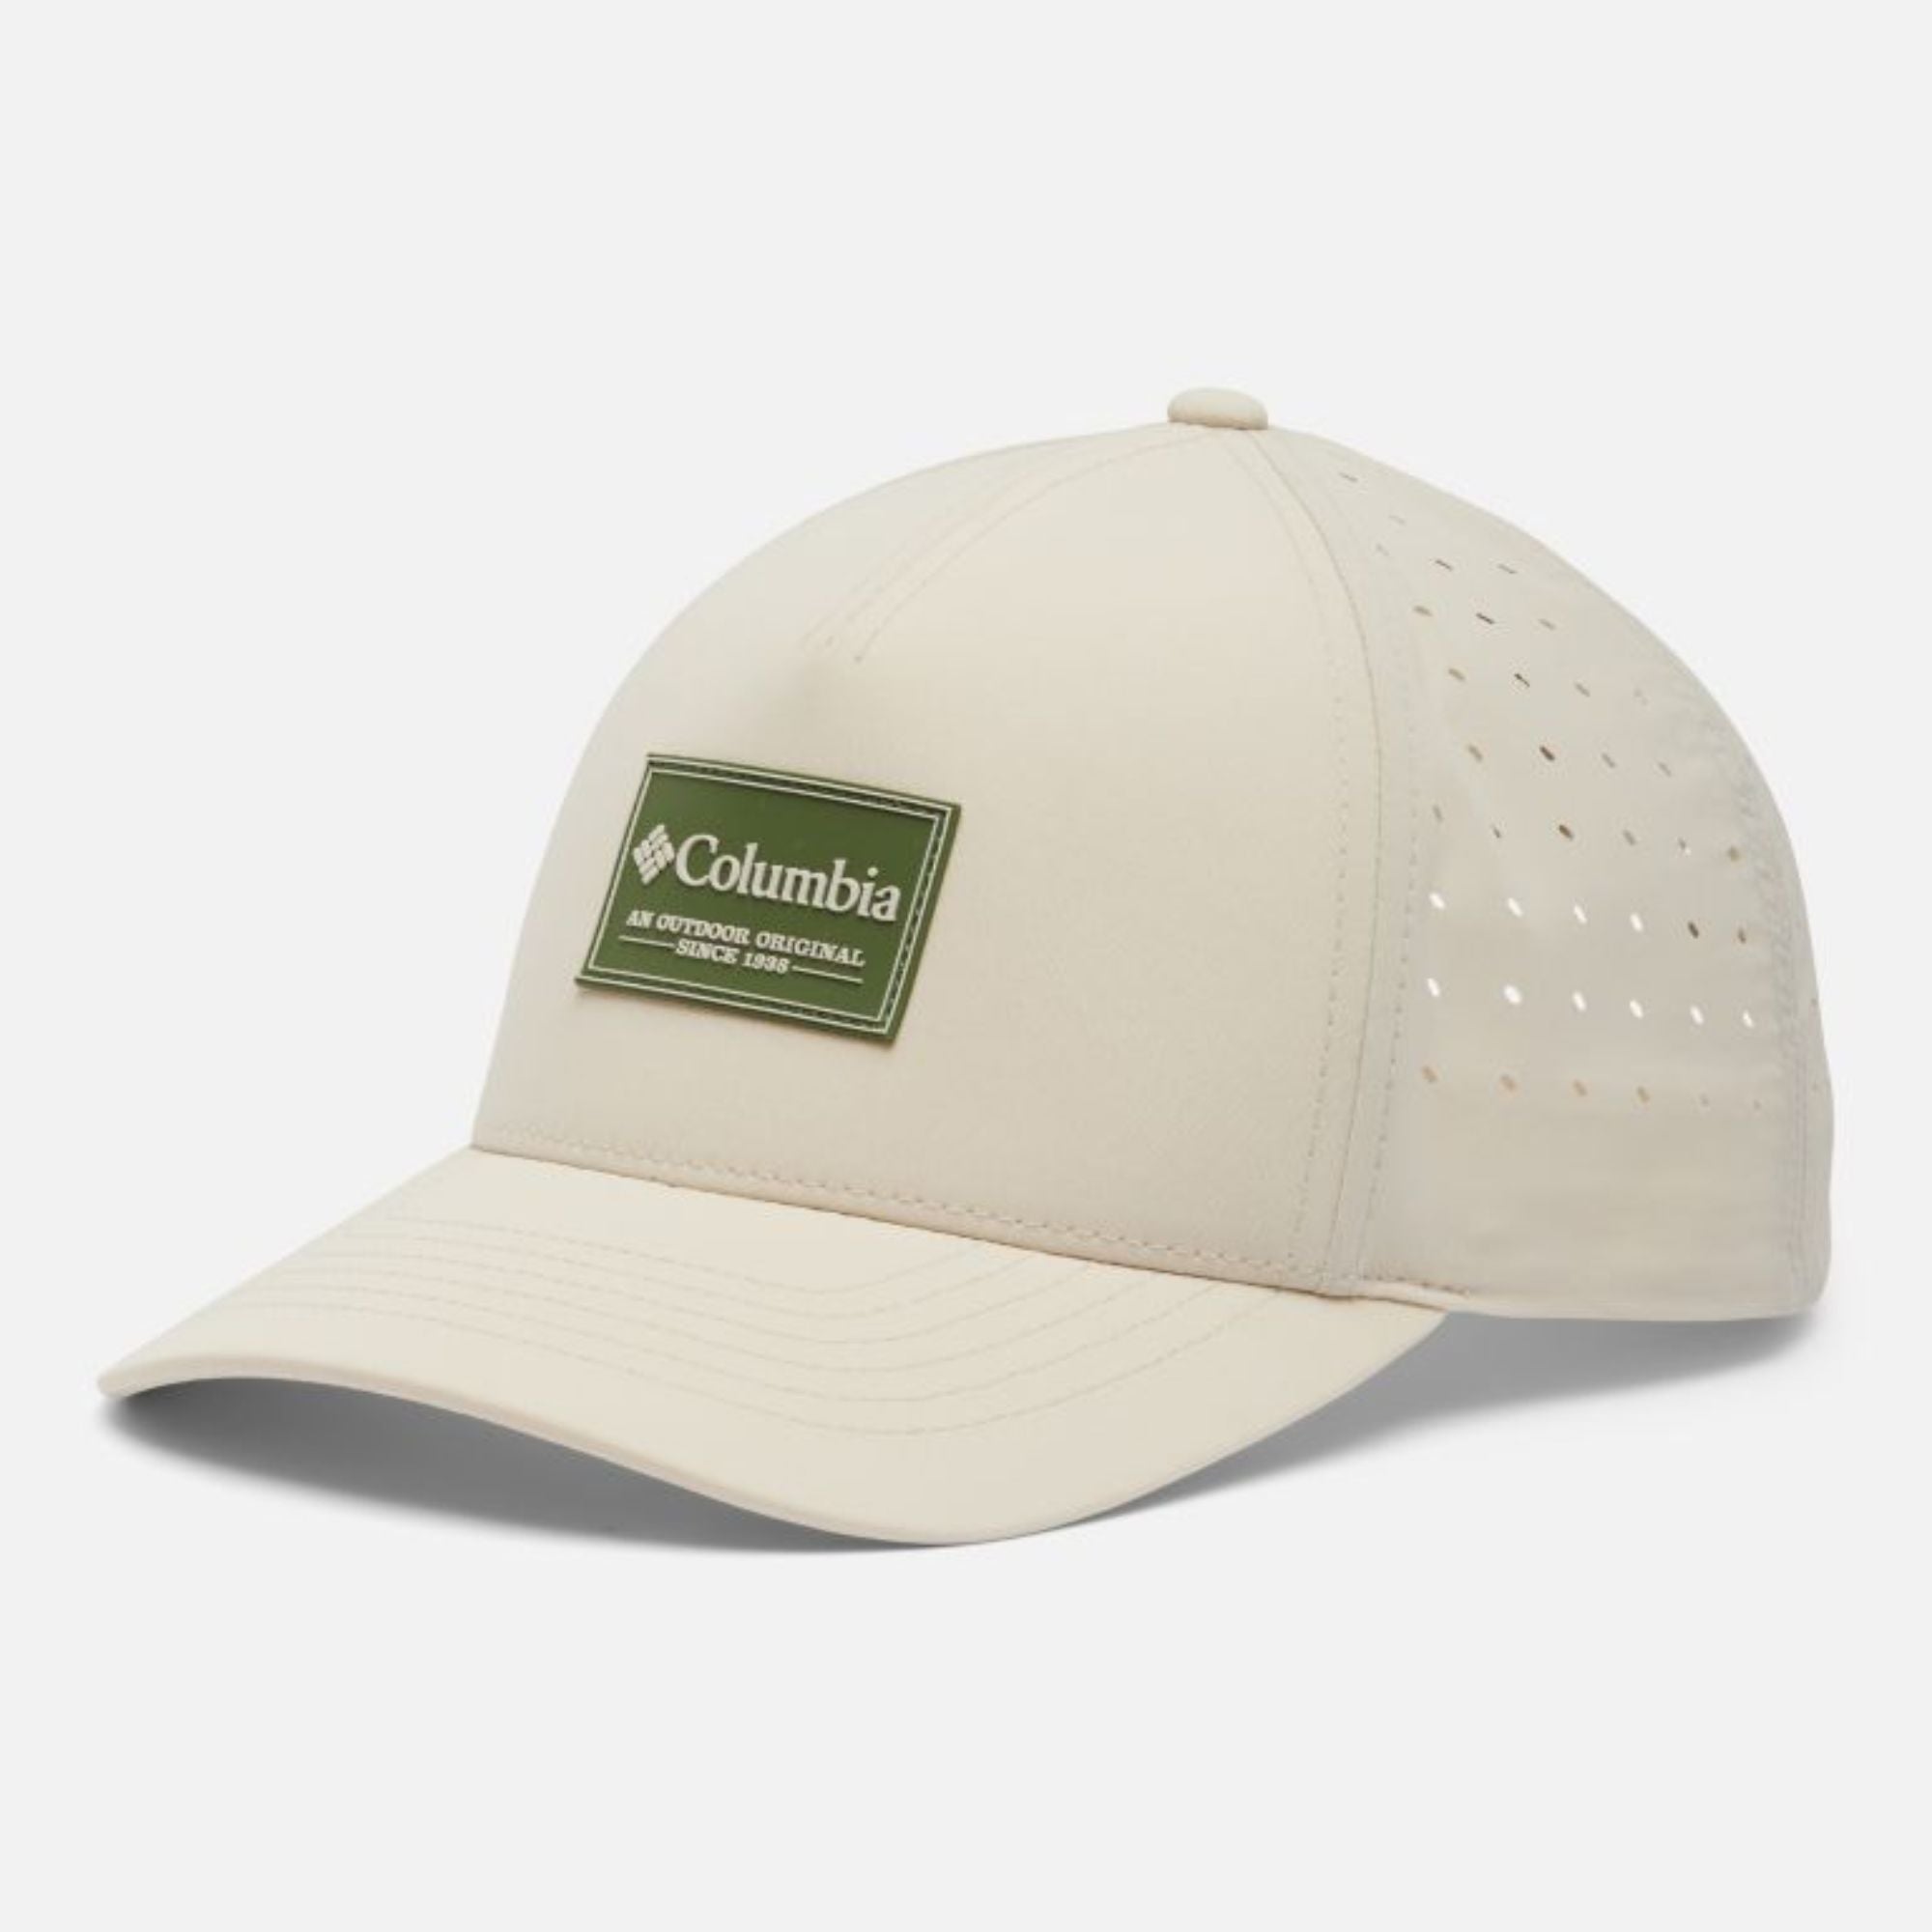 Columbia Hike 110 Snap Back Cap | COLUMBIA | Portwest - The Outdoor Shop